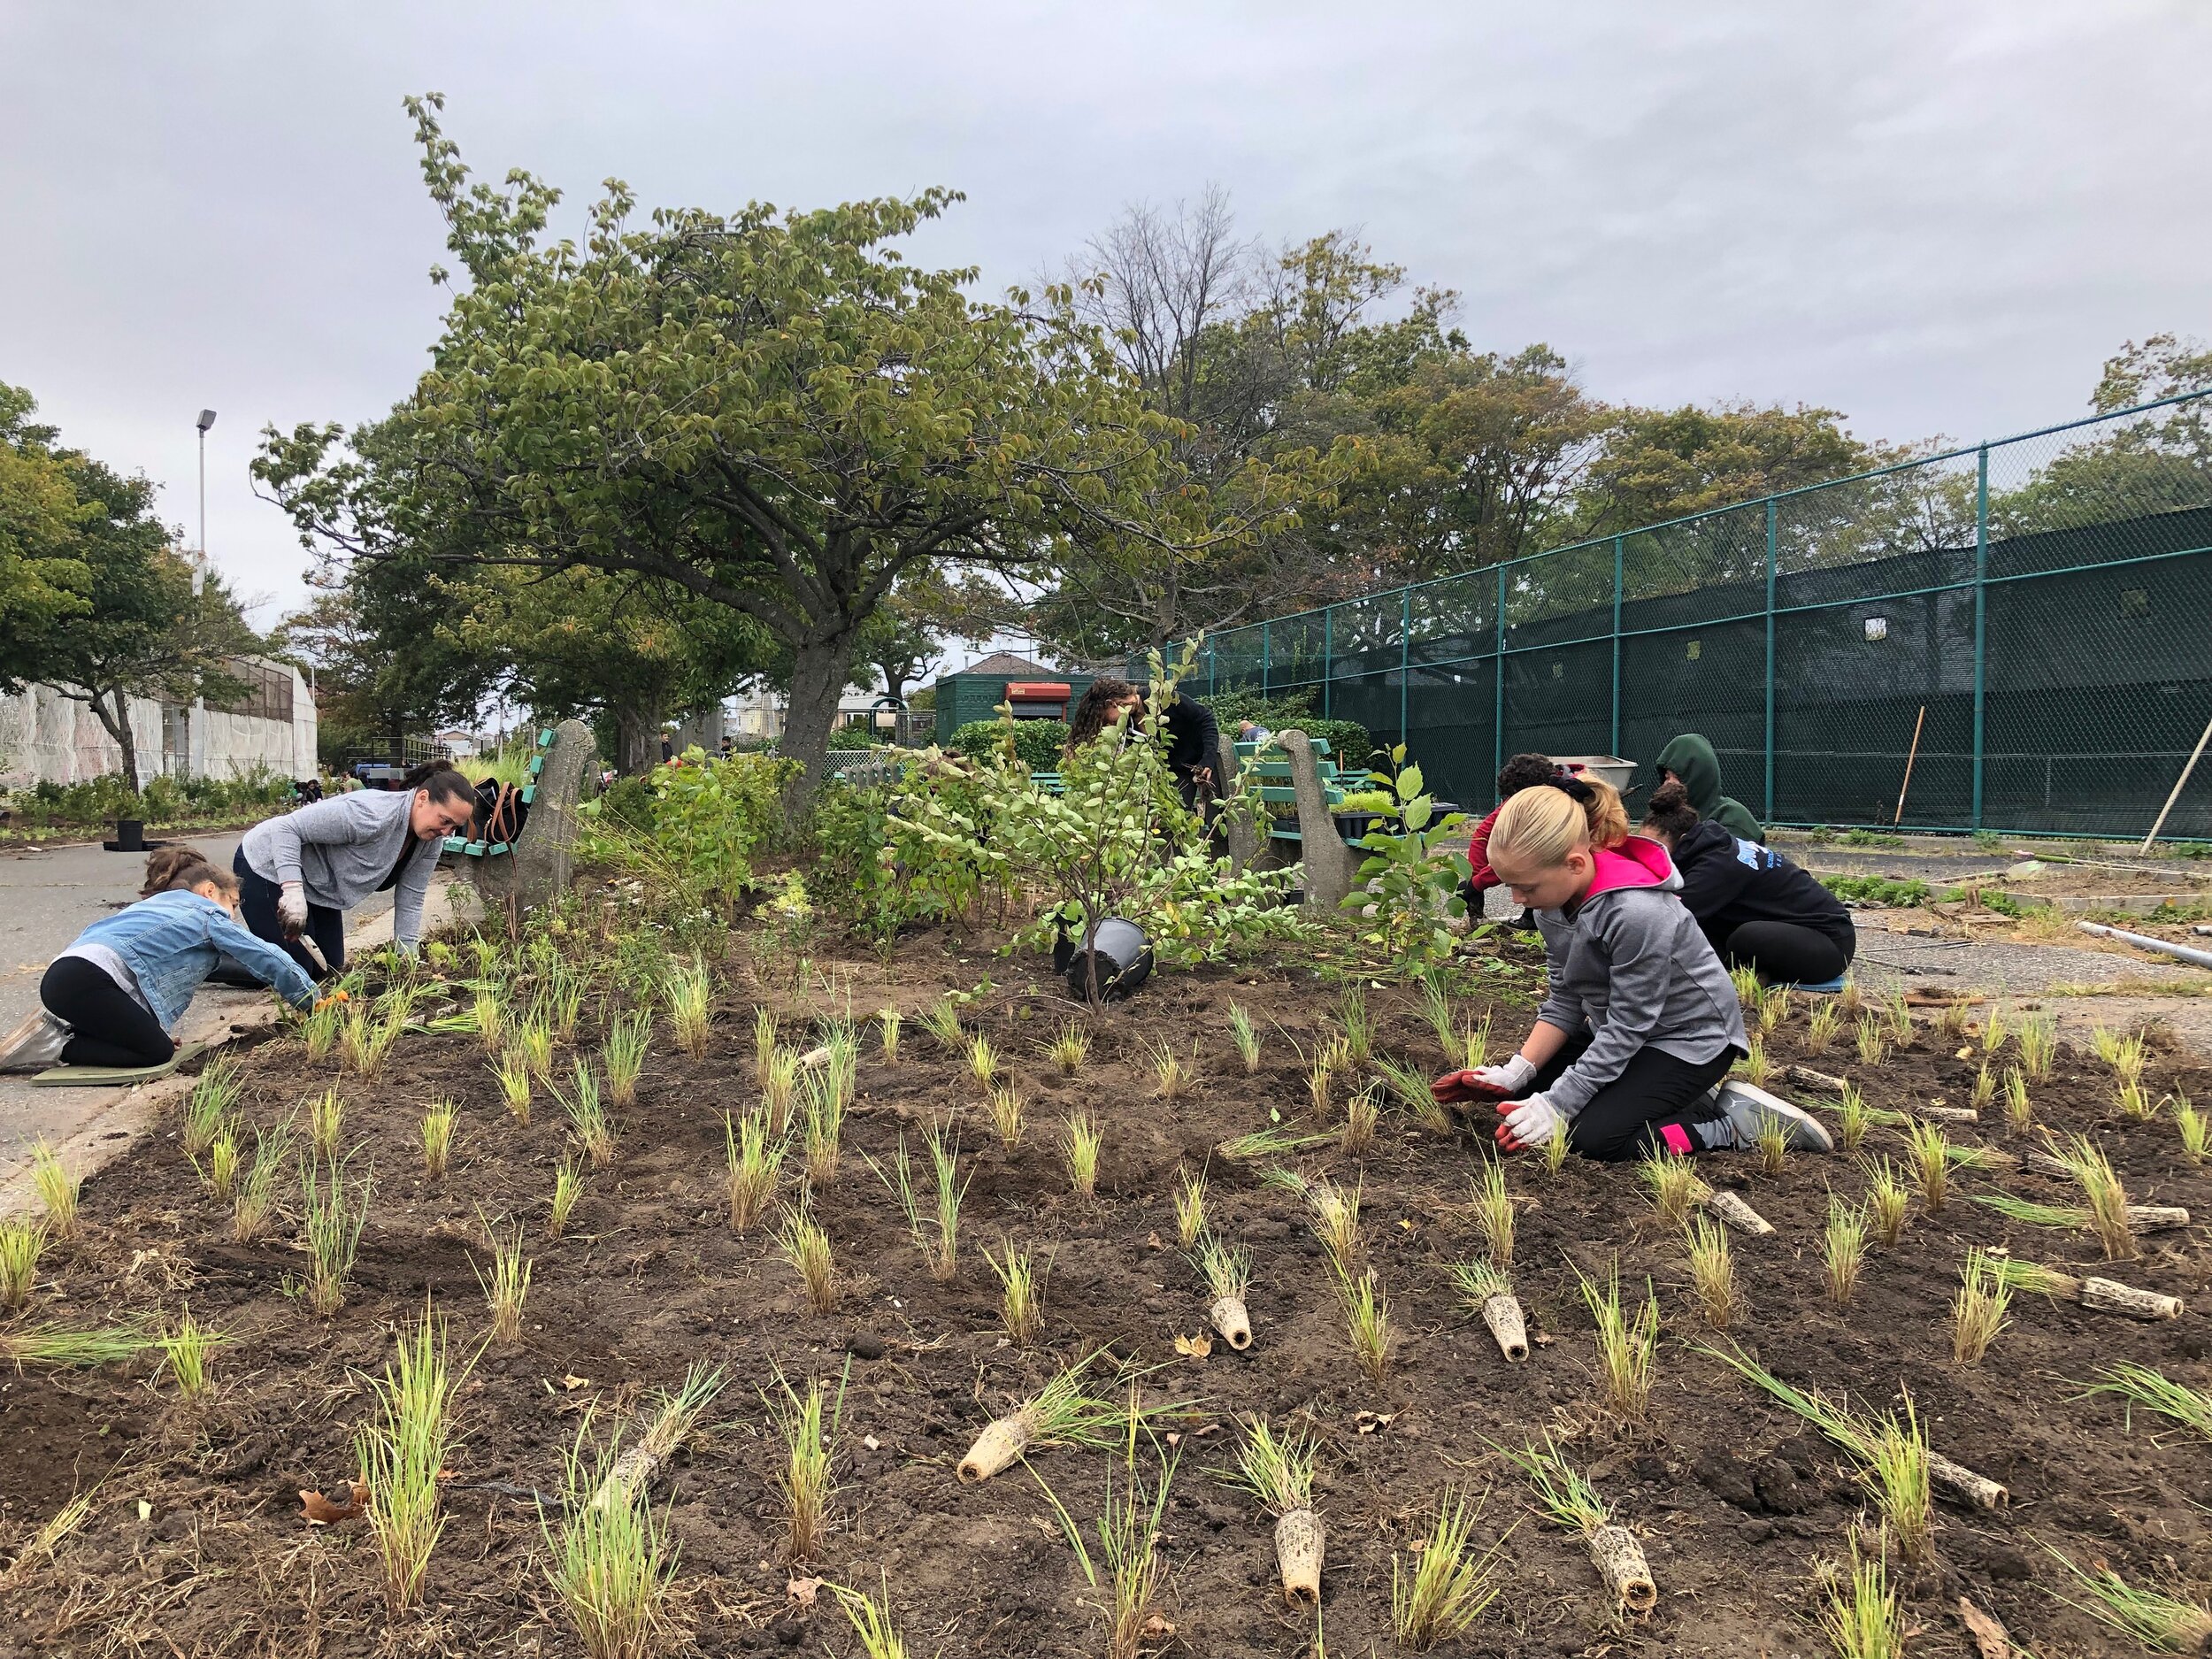 Volunteers helping plant 9,000 native shrubs and perennials